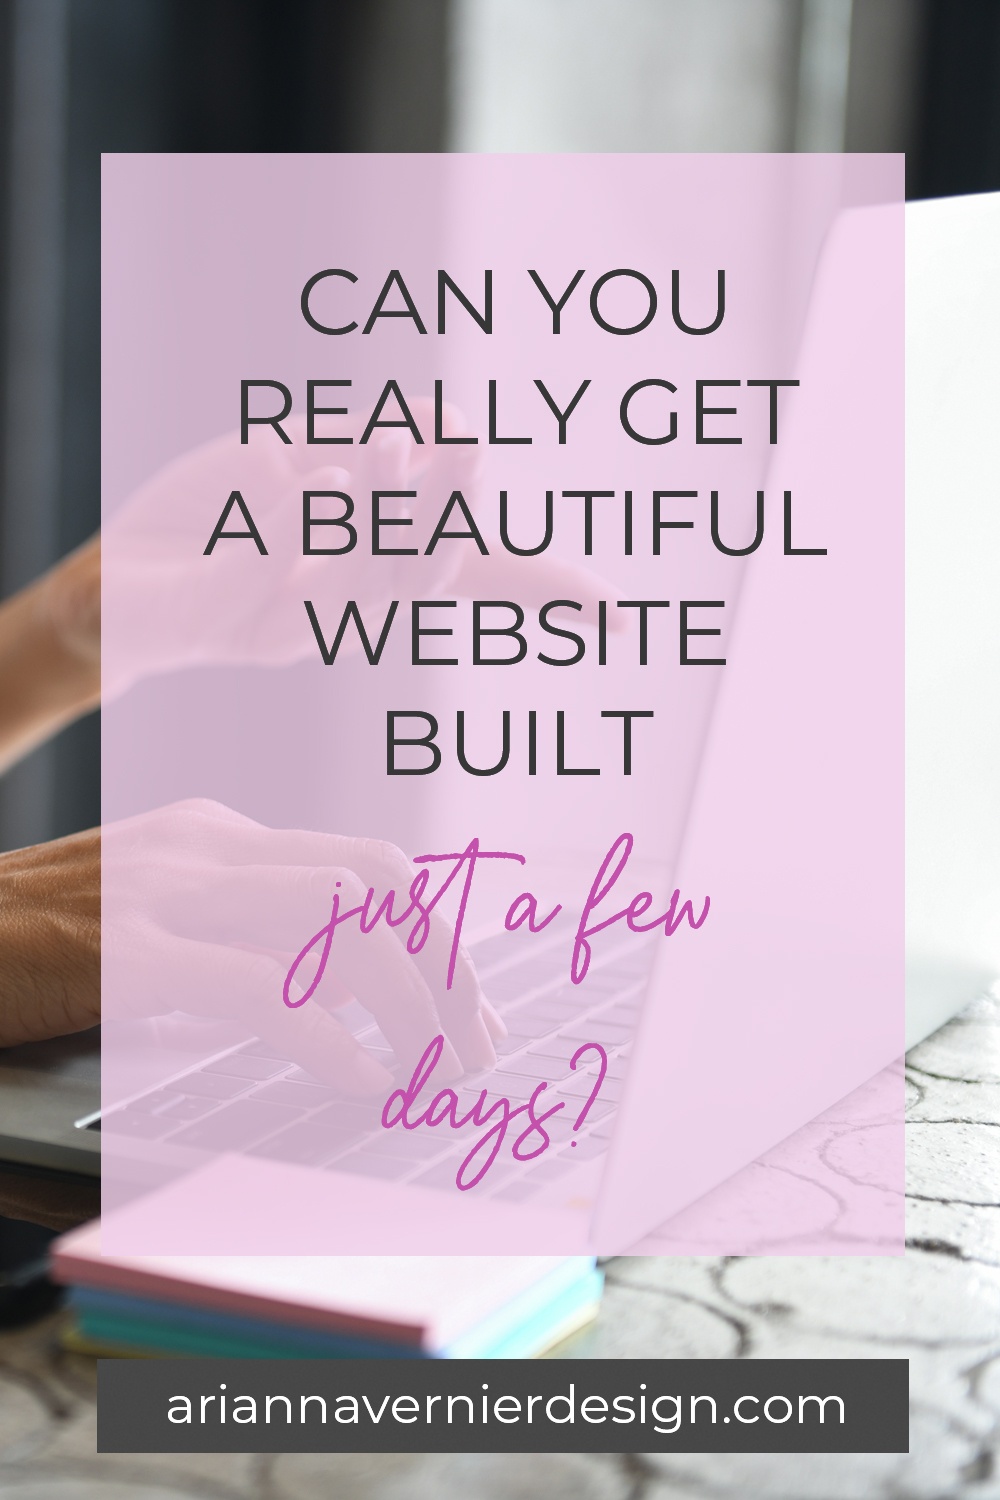 Pinterest pin with a woman typing on her laptop in the background, with a light purple rectangle over top, and the title "Can You Really Get a Beautiful Website Built in Just a Few Days? Breaking Down my VIP Design Day Process."